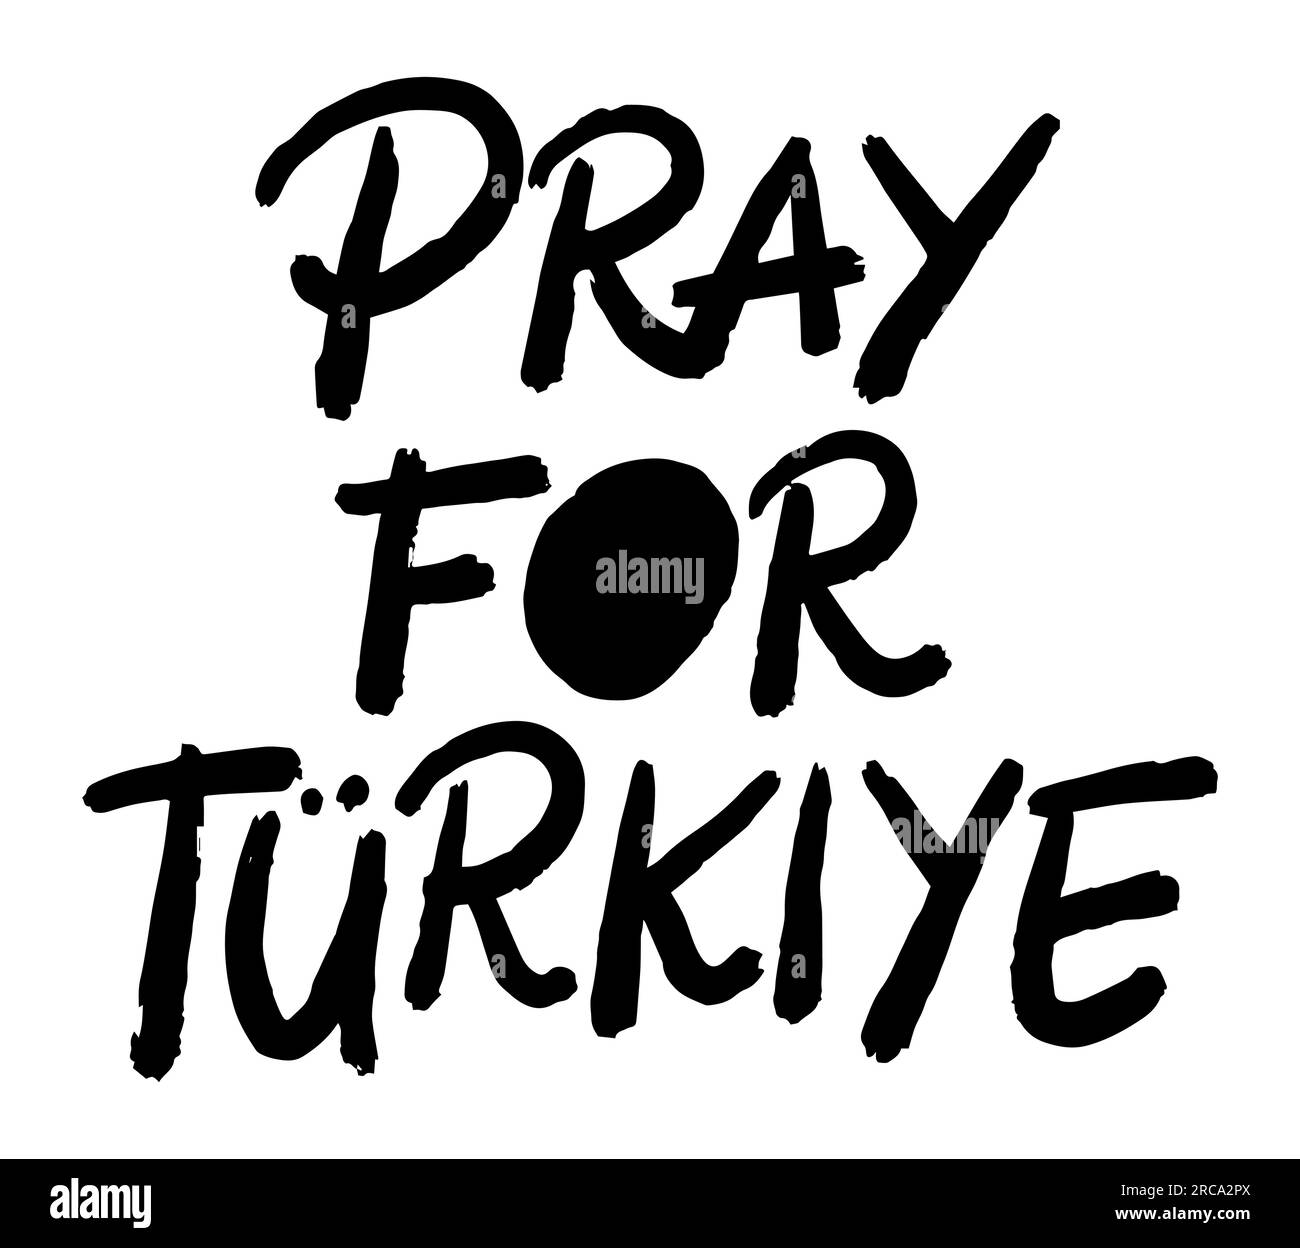 Pray for Turkey quote typography, Font text, vector illustration isolated on white background, Turkiye, Awareness message Stock Vector